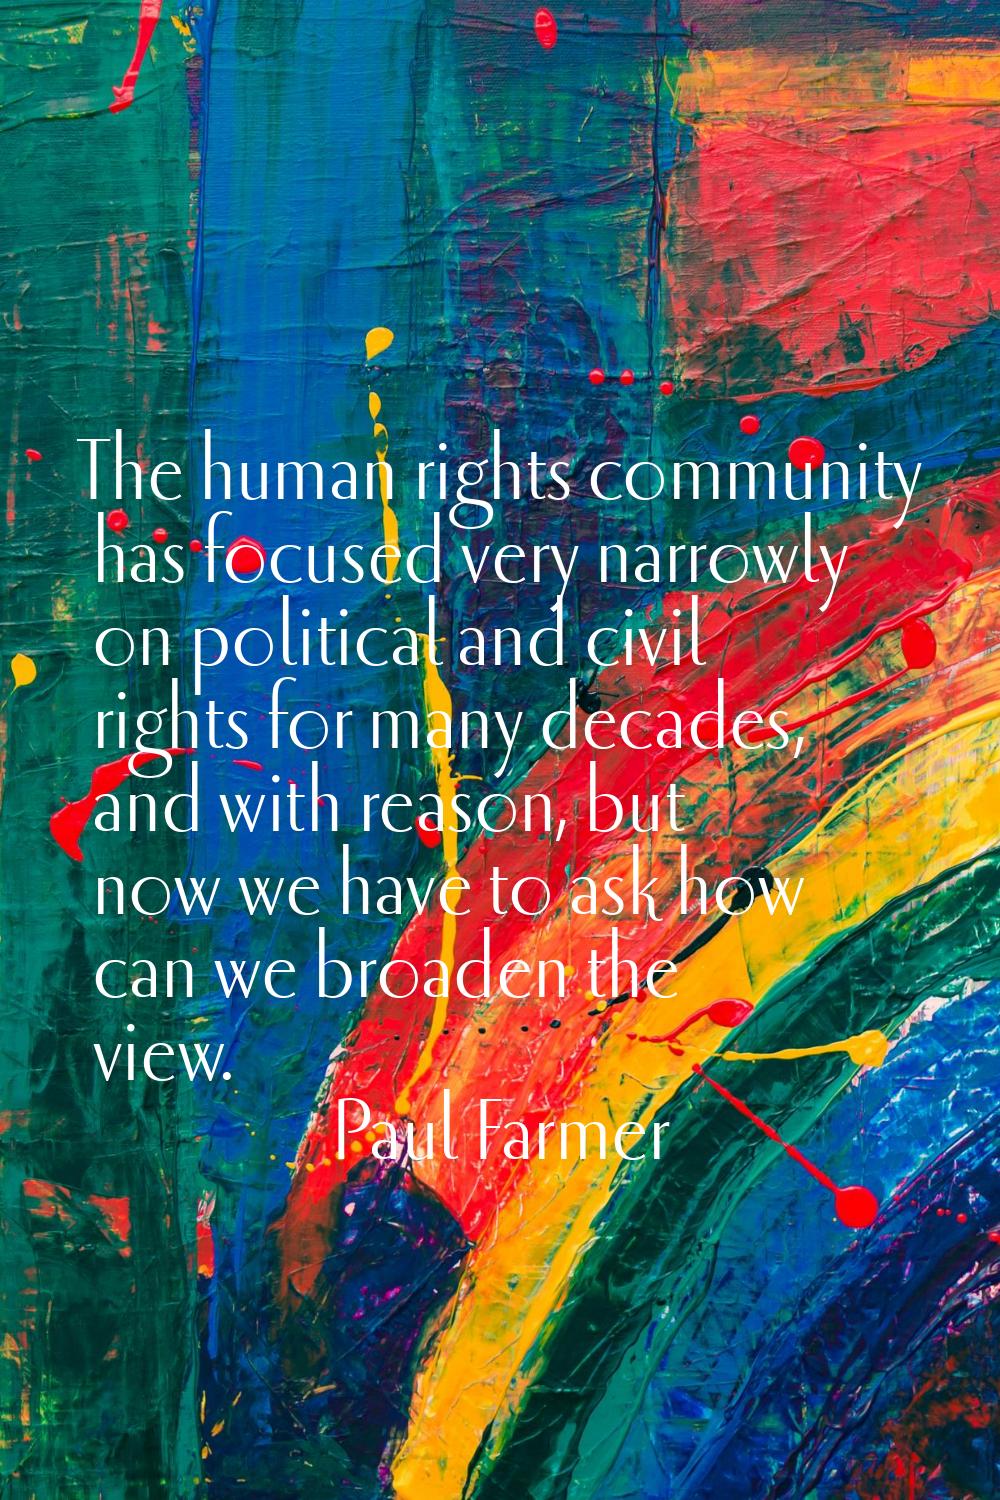 The human rights community has focused very narrowly on political and civil rights for many decades